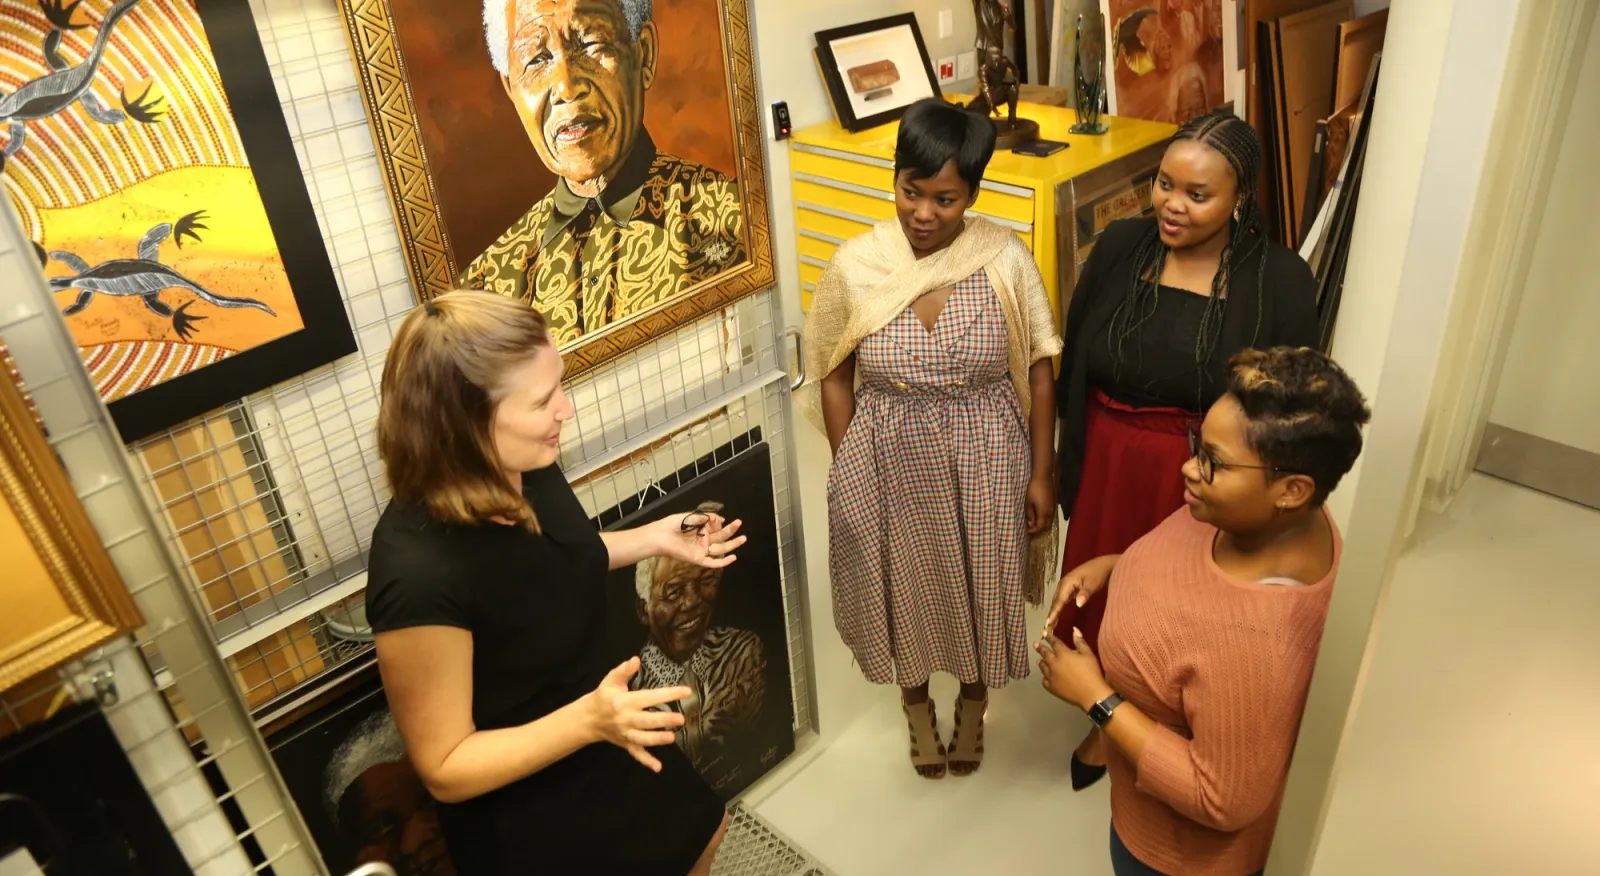 Four women stand in an art gallery talking, behind them is a large and prominent photo of Nelson Mandela.